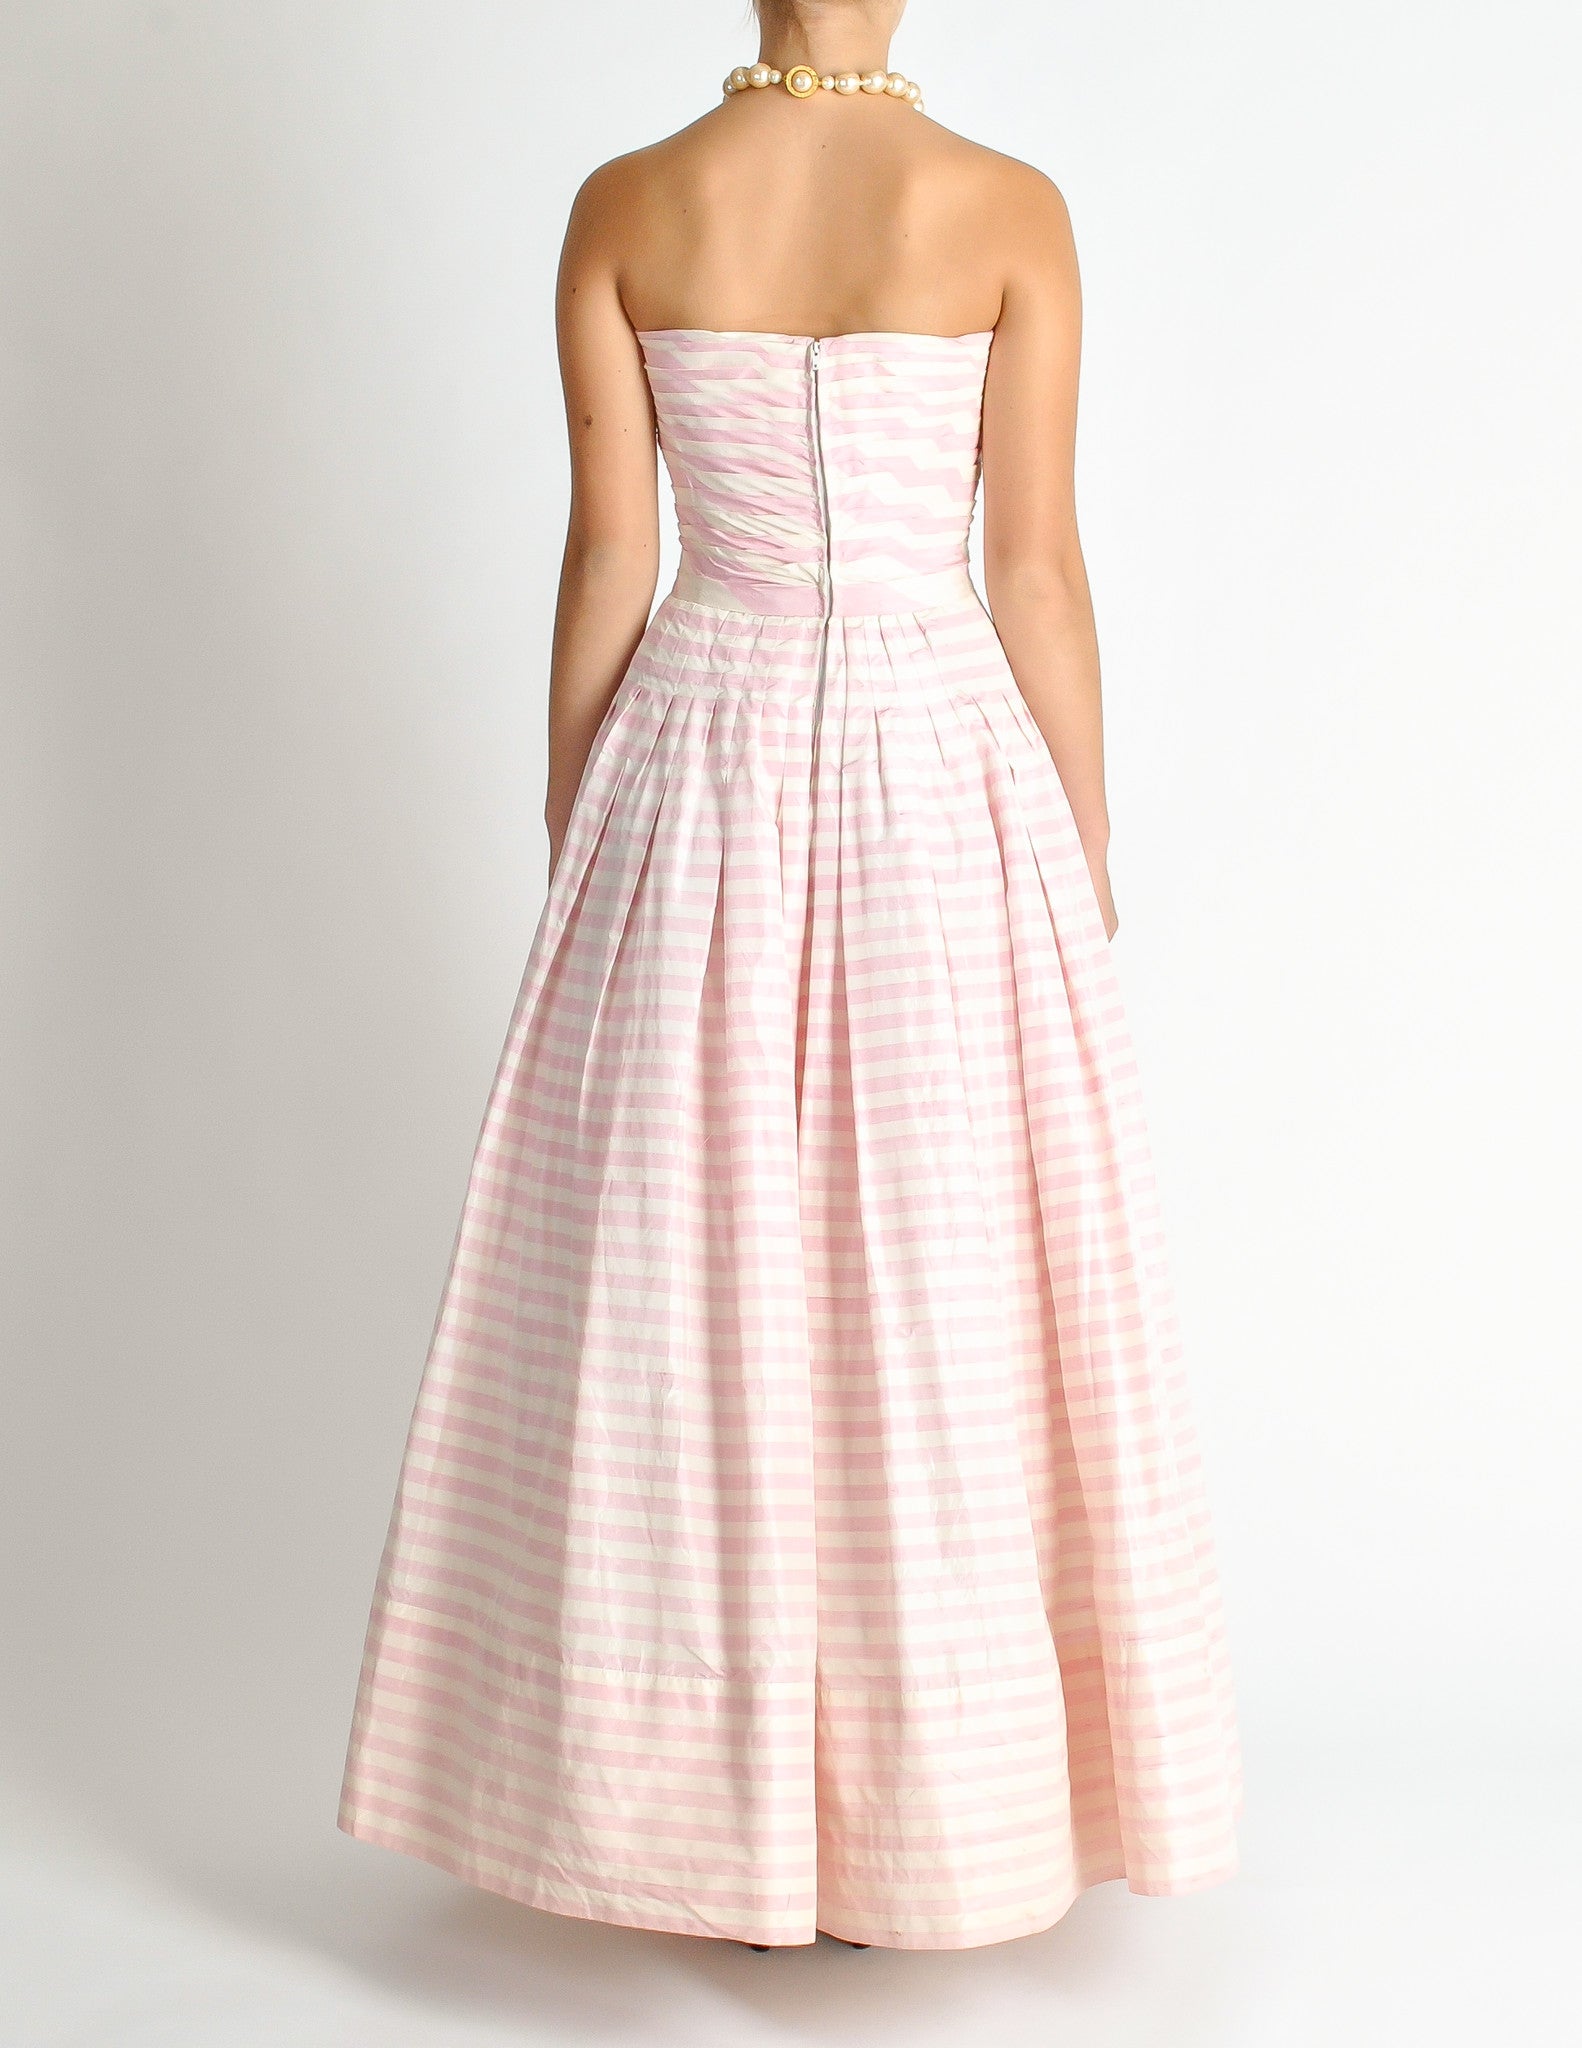 Chanel Vintage Pink & White Striped Raw Silk Gown Dress - from Amarcord ...